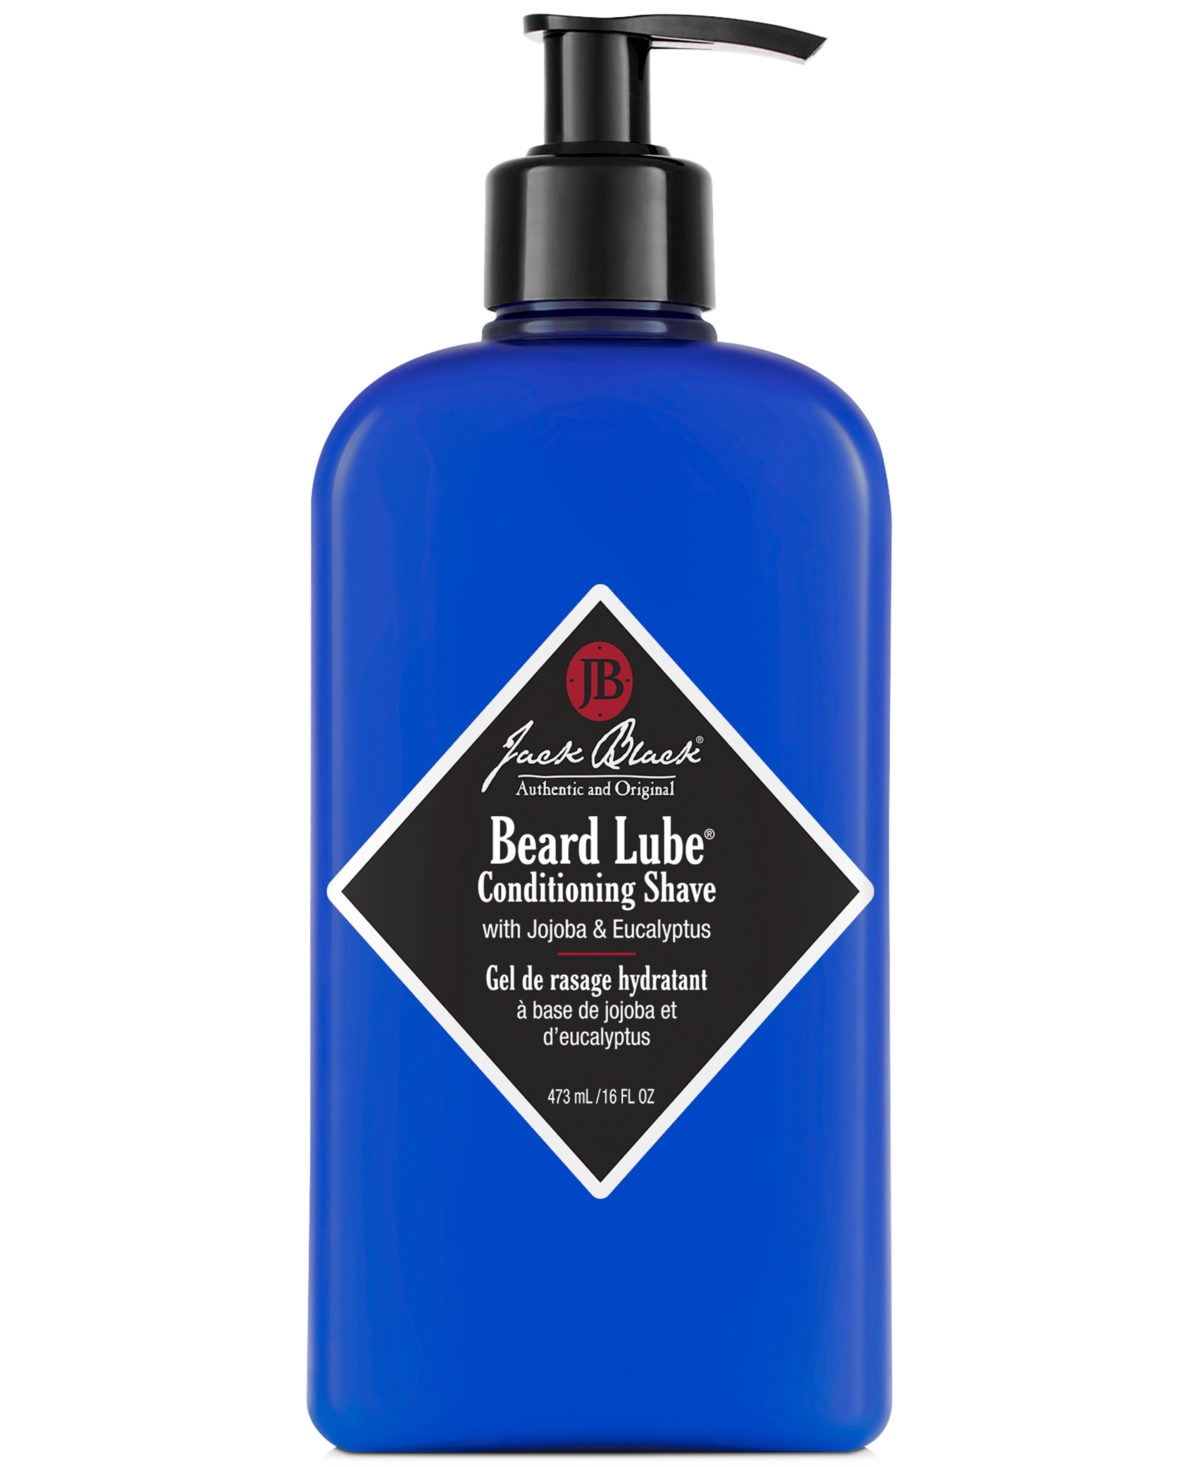 Beard Lube Conditioning Shave, 16 oz.